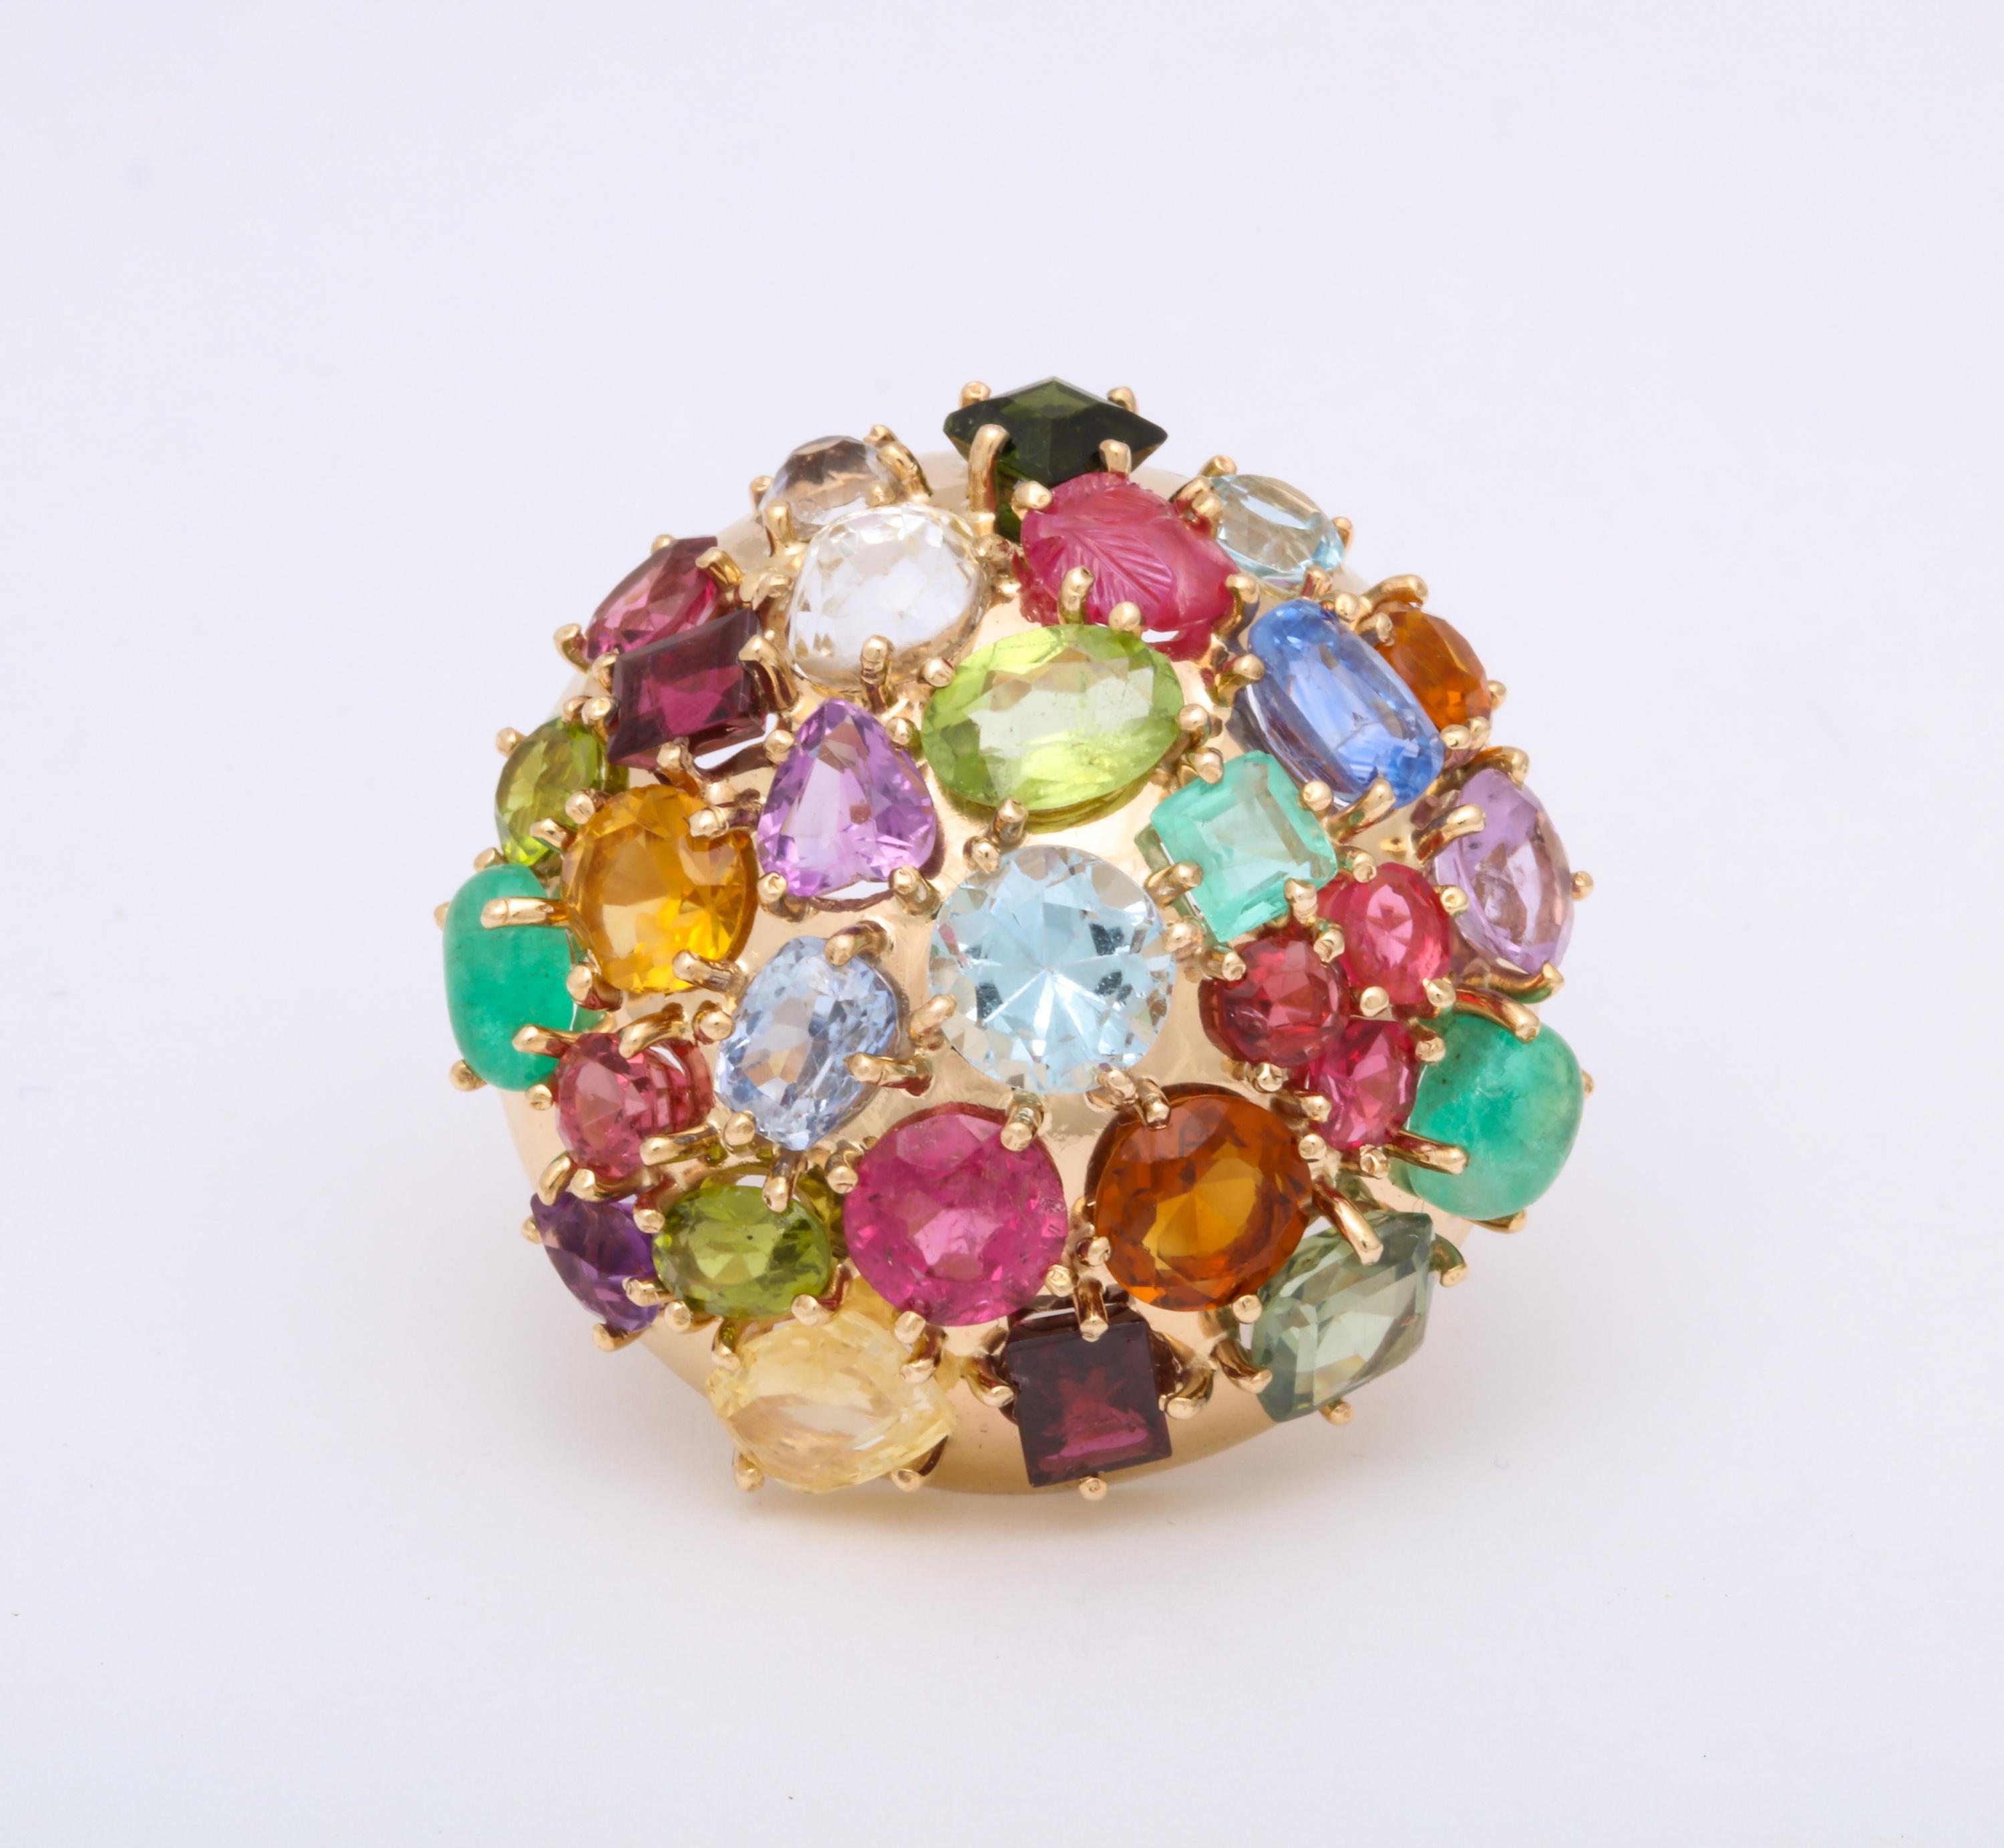 One 14kt High Polish Yellow Gold Ring Size 5.75 NOTE: MAY BE RESIZED. Embellished With Numerous Multi Colored Stones Composed Of Carved Rubies, Ceylon Sapphires,Citrines,Emeralds,Peridots,Yellow Sapphires,Amethyst,And Aquamarines. Dramatic Cocktail